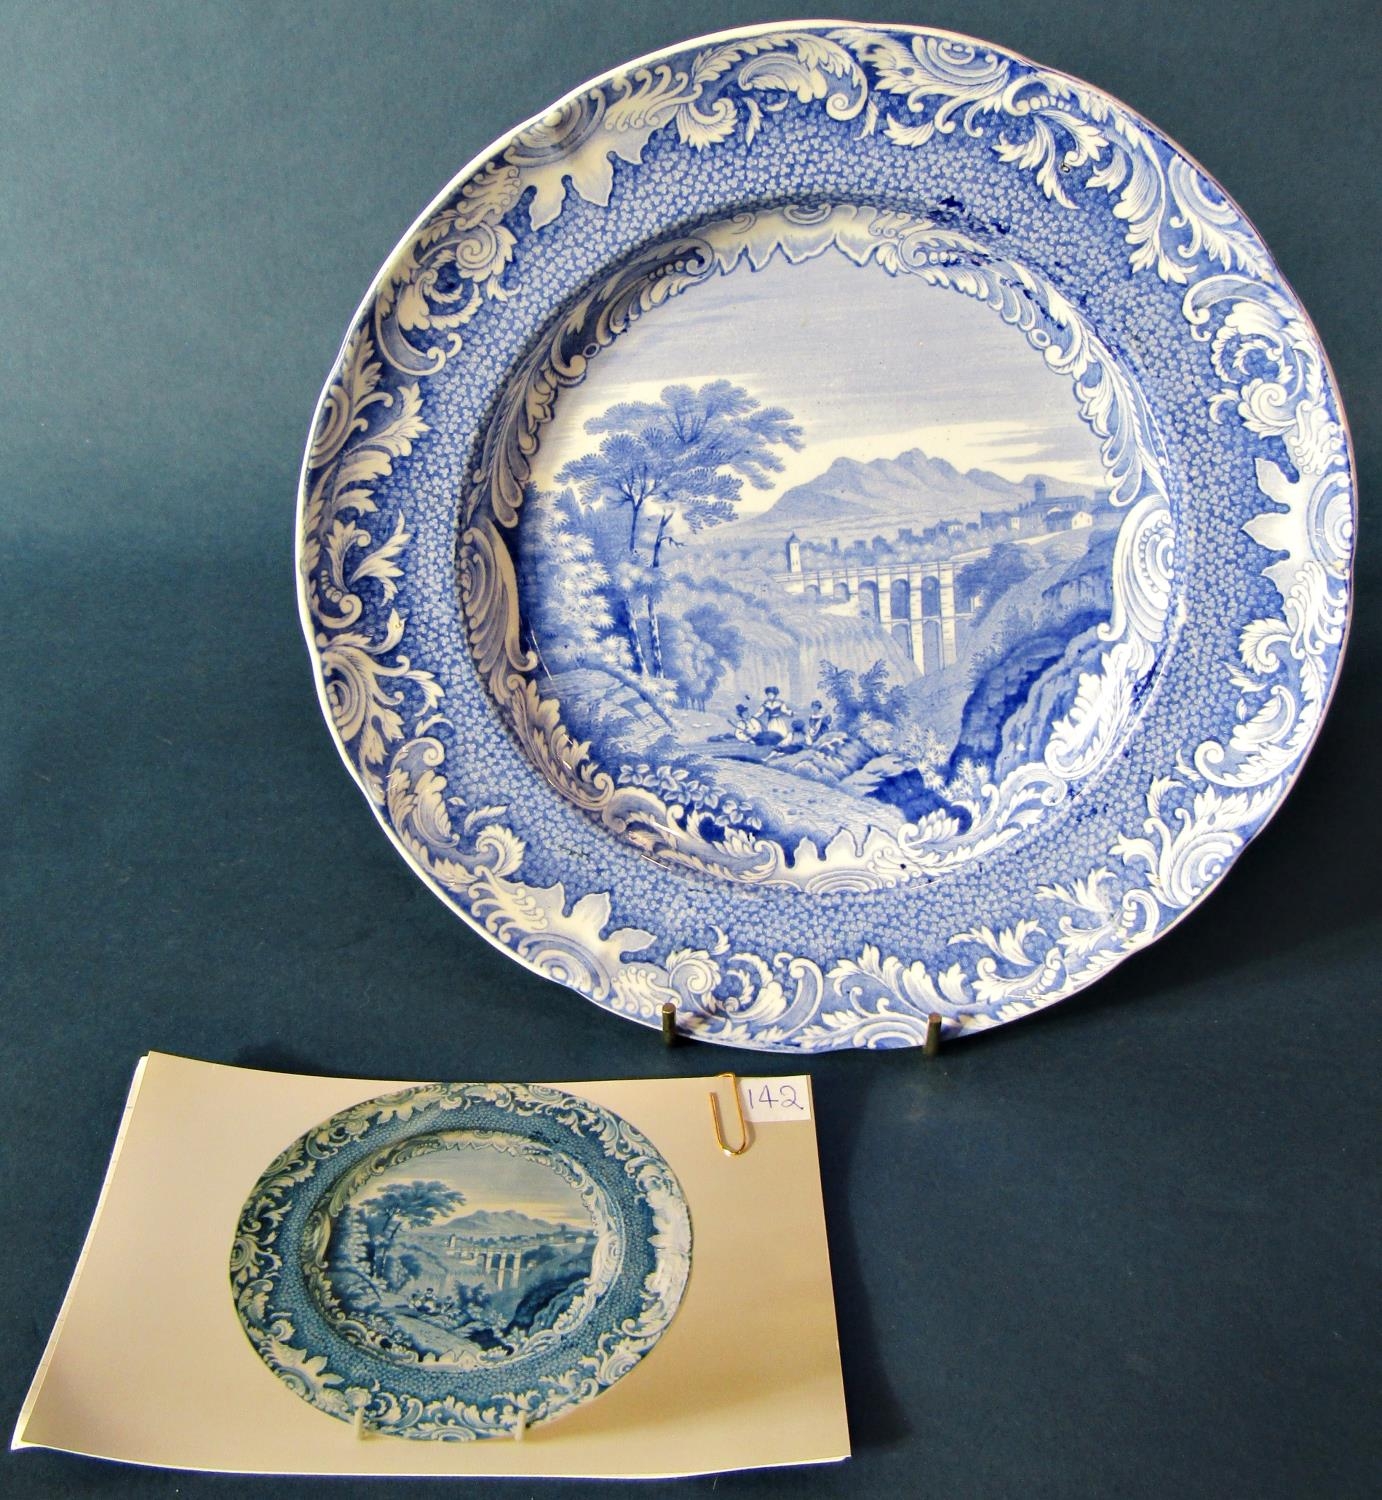 A 19th century blue and white transfer ware plate by Rogers showing a Giraffe and characters in a - Image 3 of 3